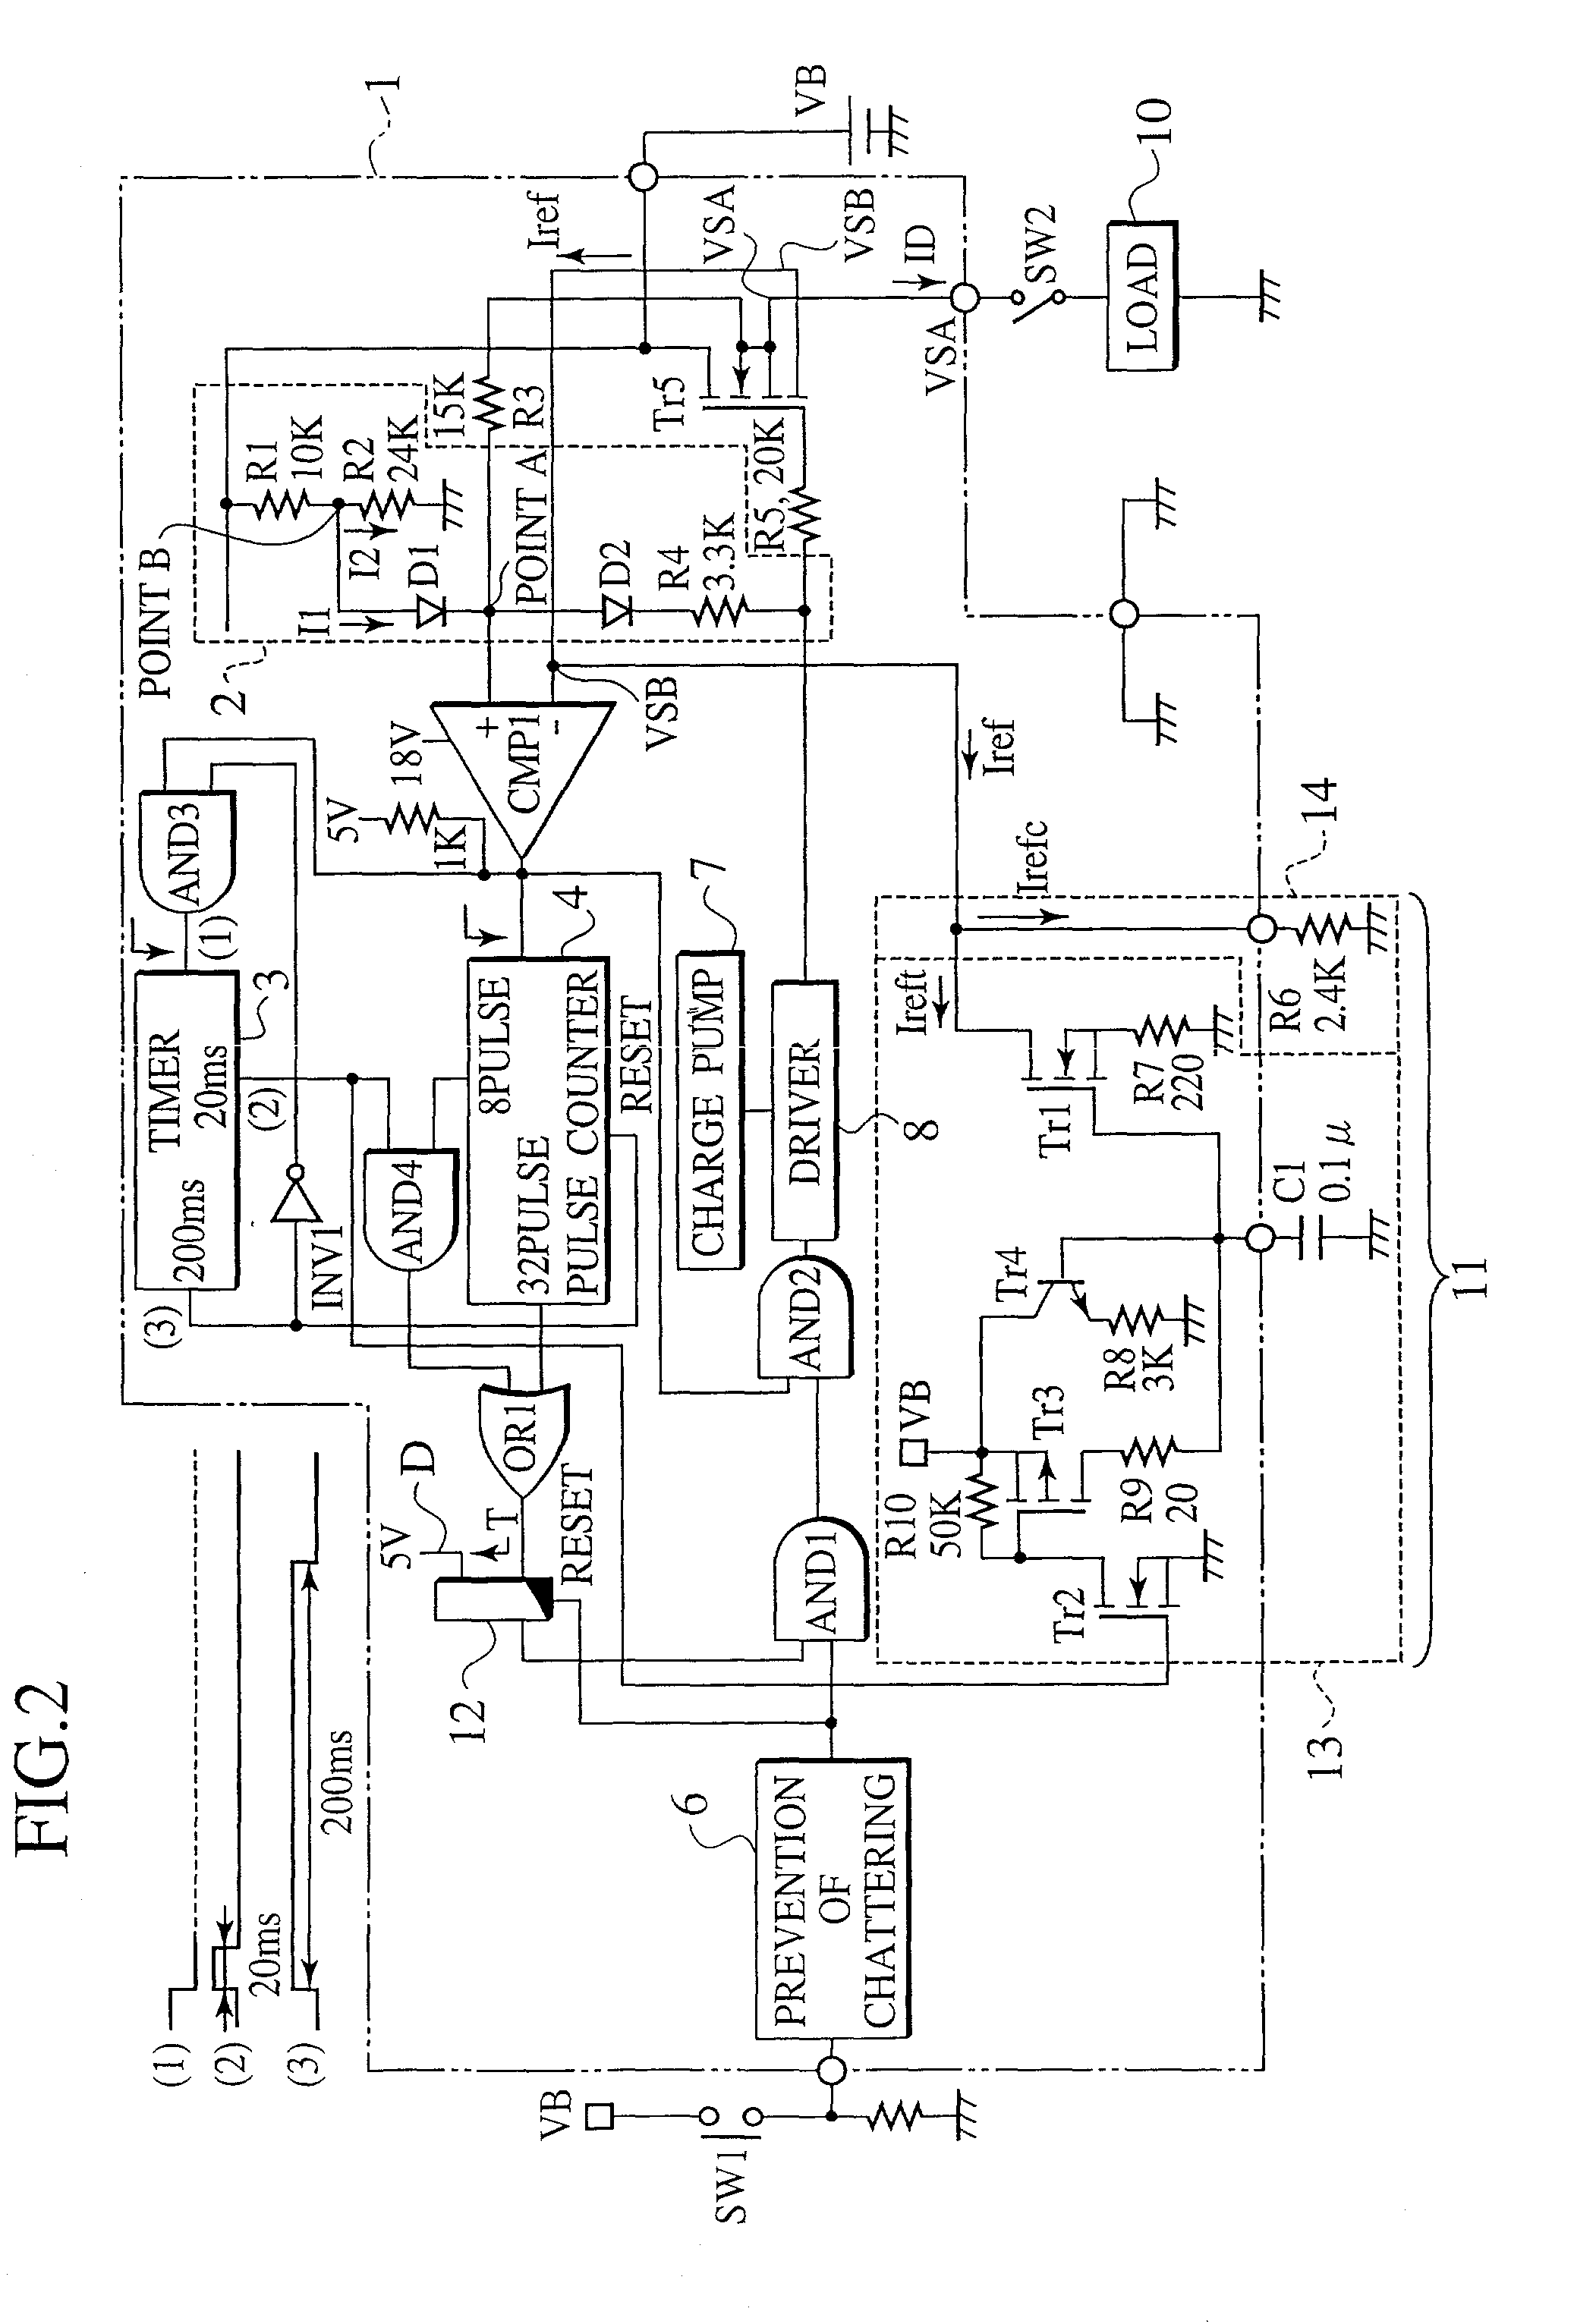 Semiconductor switching device with function for vibrating current, thereby shutting down over-current